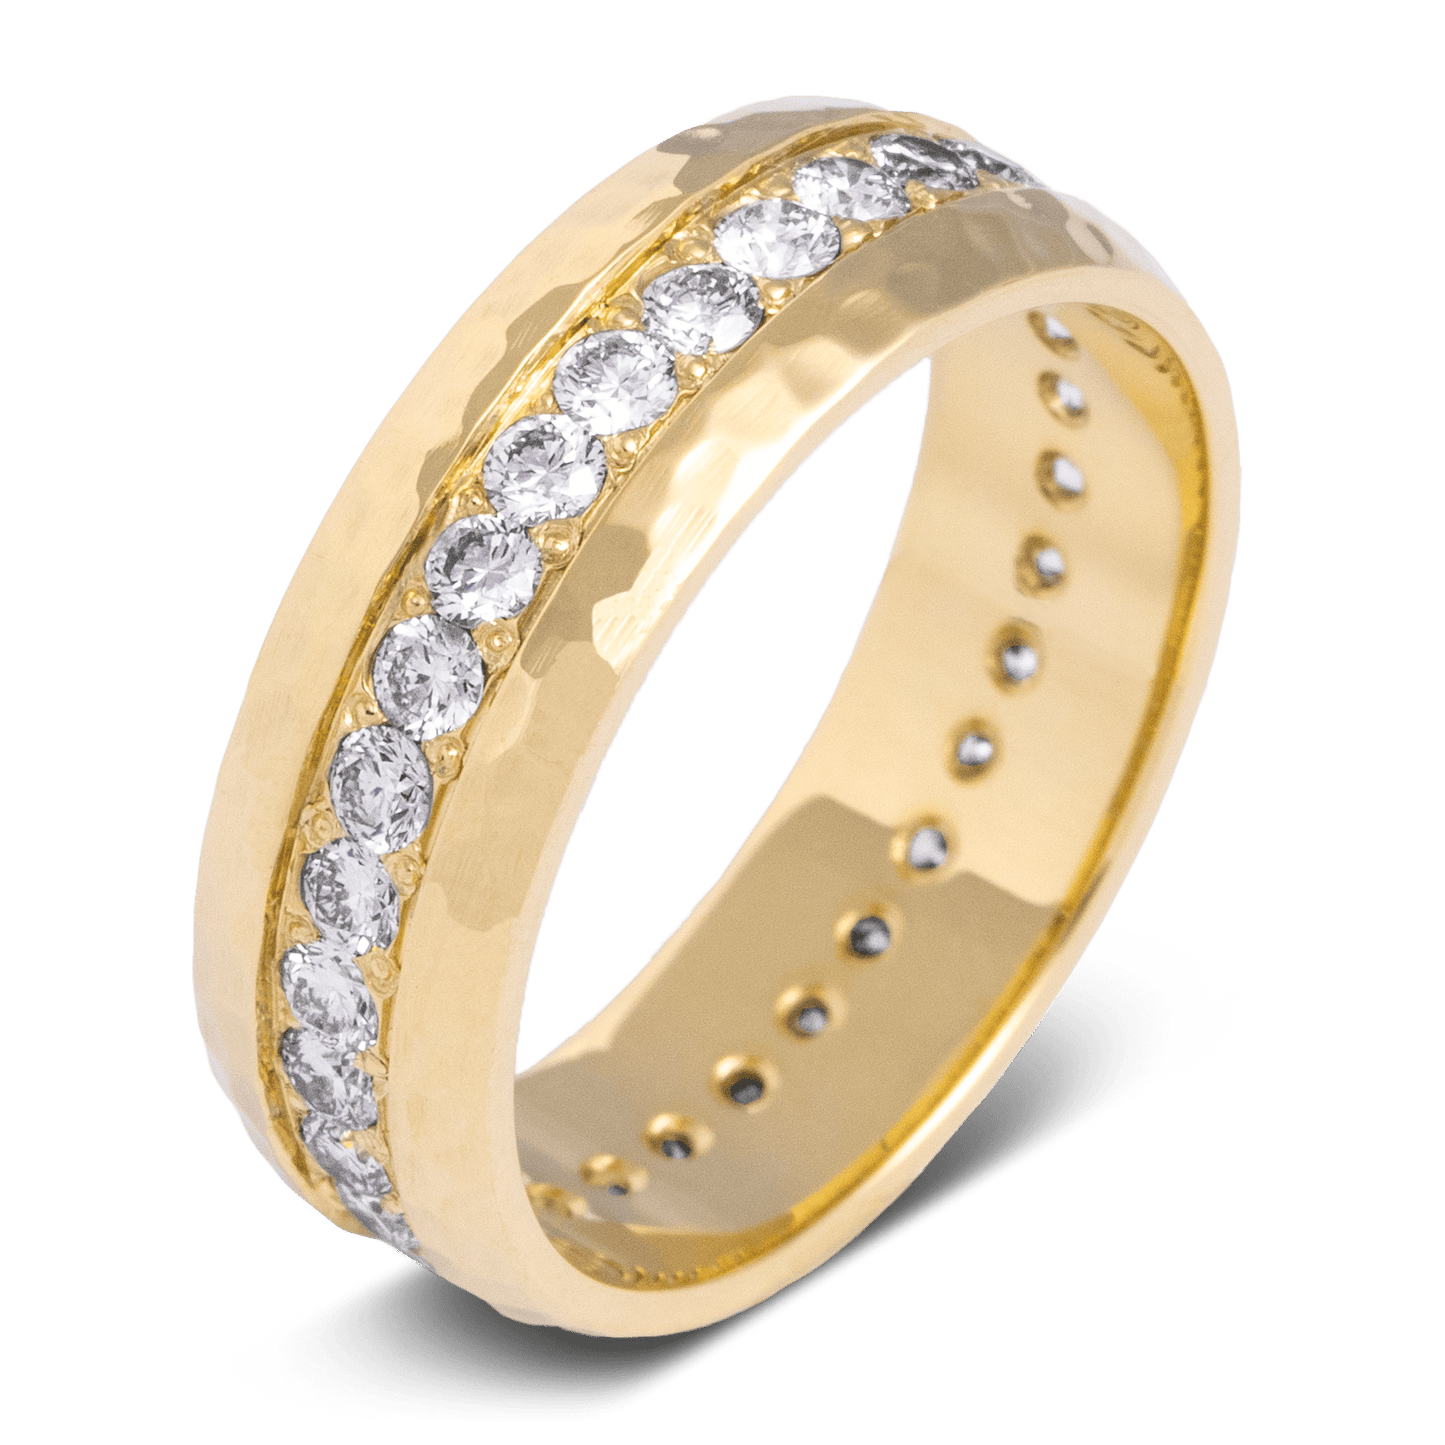 The Count. Mens gold wedding band made with yellow gold and white diamonds